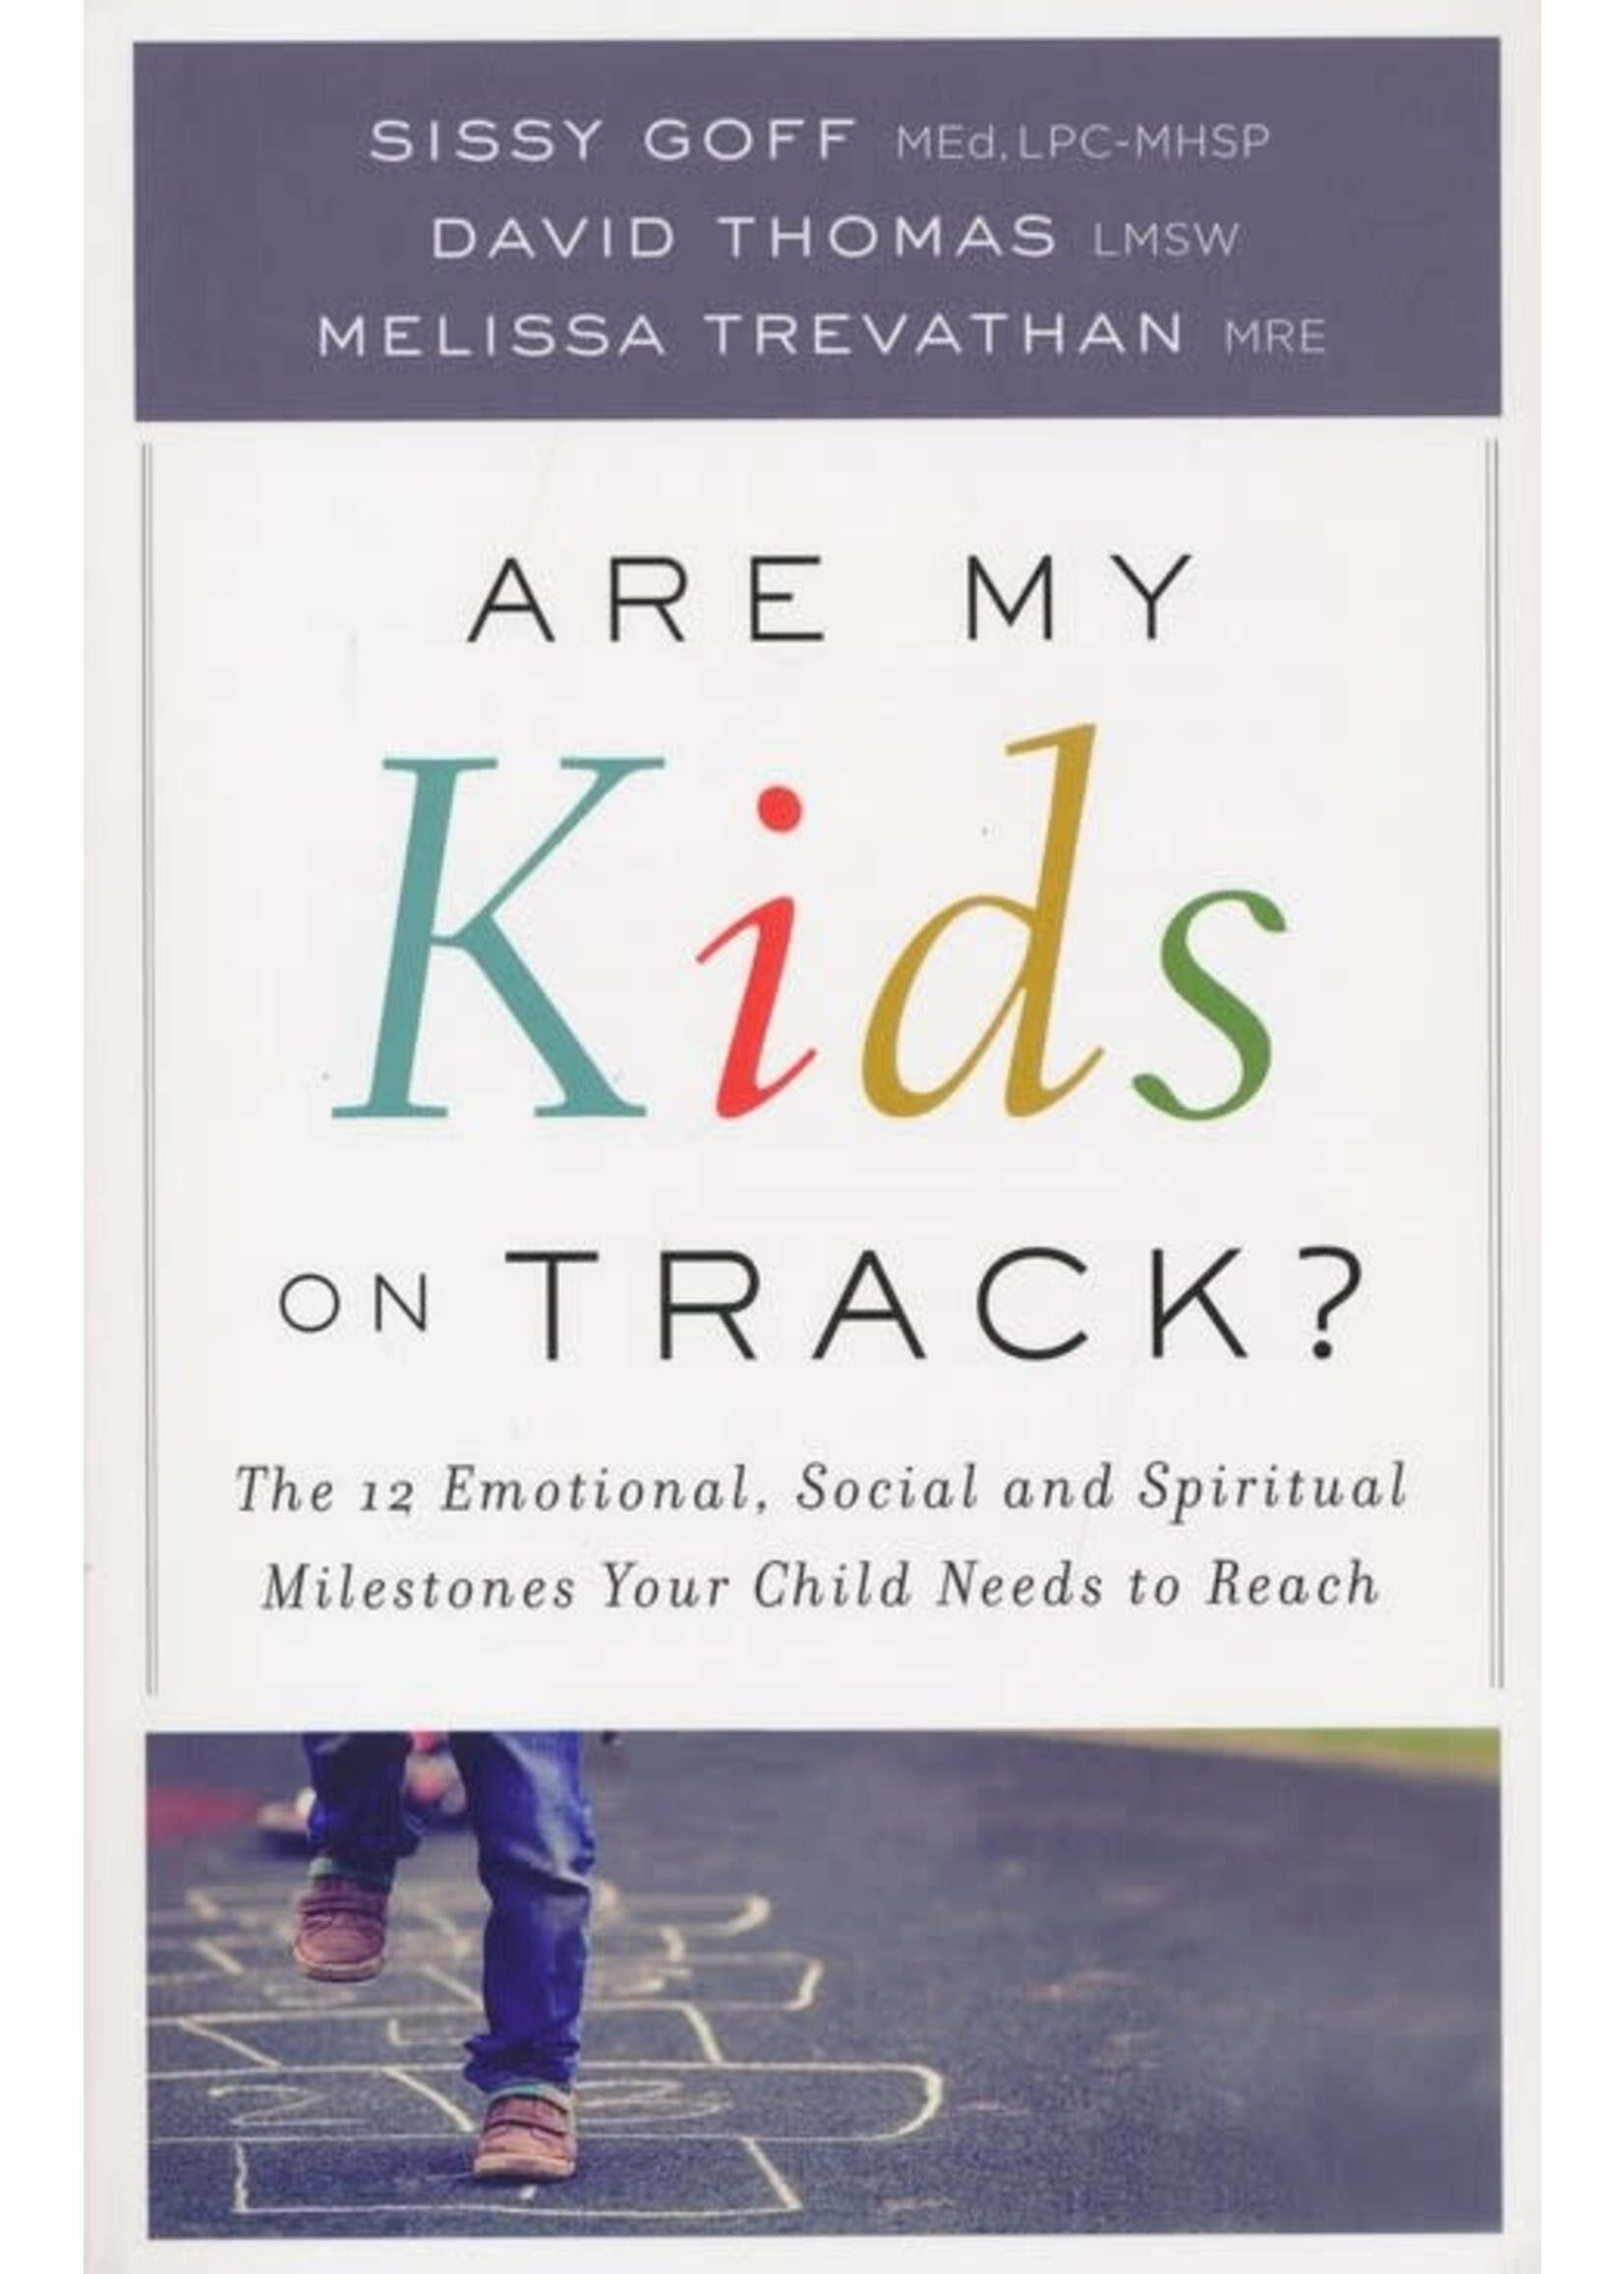 Are My Kids on Track?: The 12 Emotional, Social, and Spiritual Milestones Your Child Needs to Reach